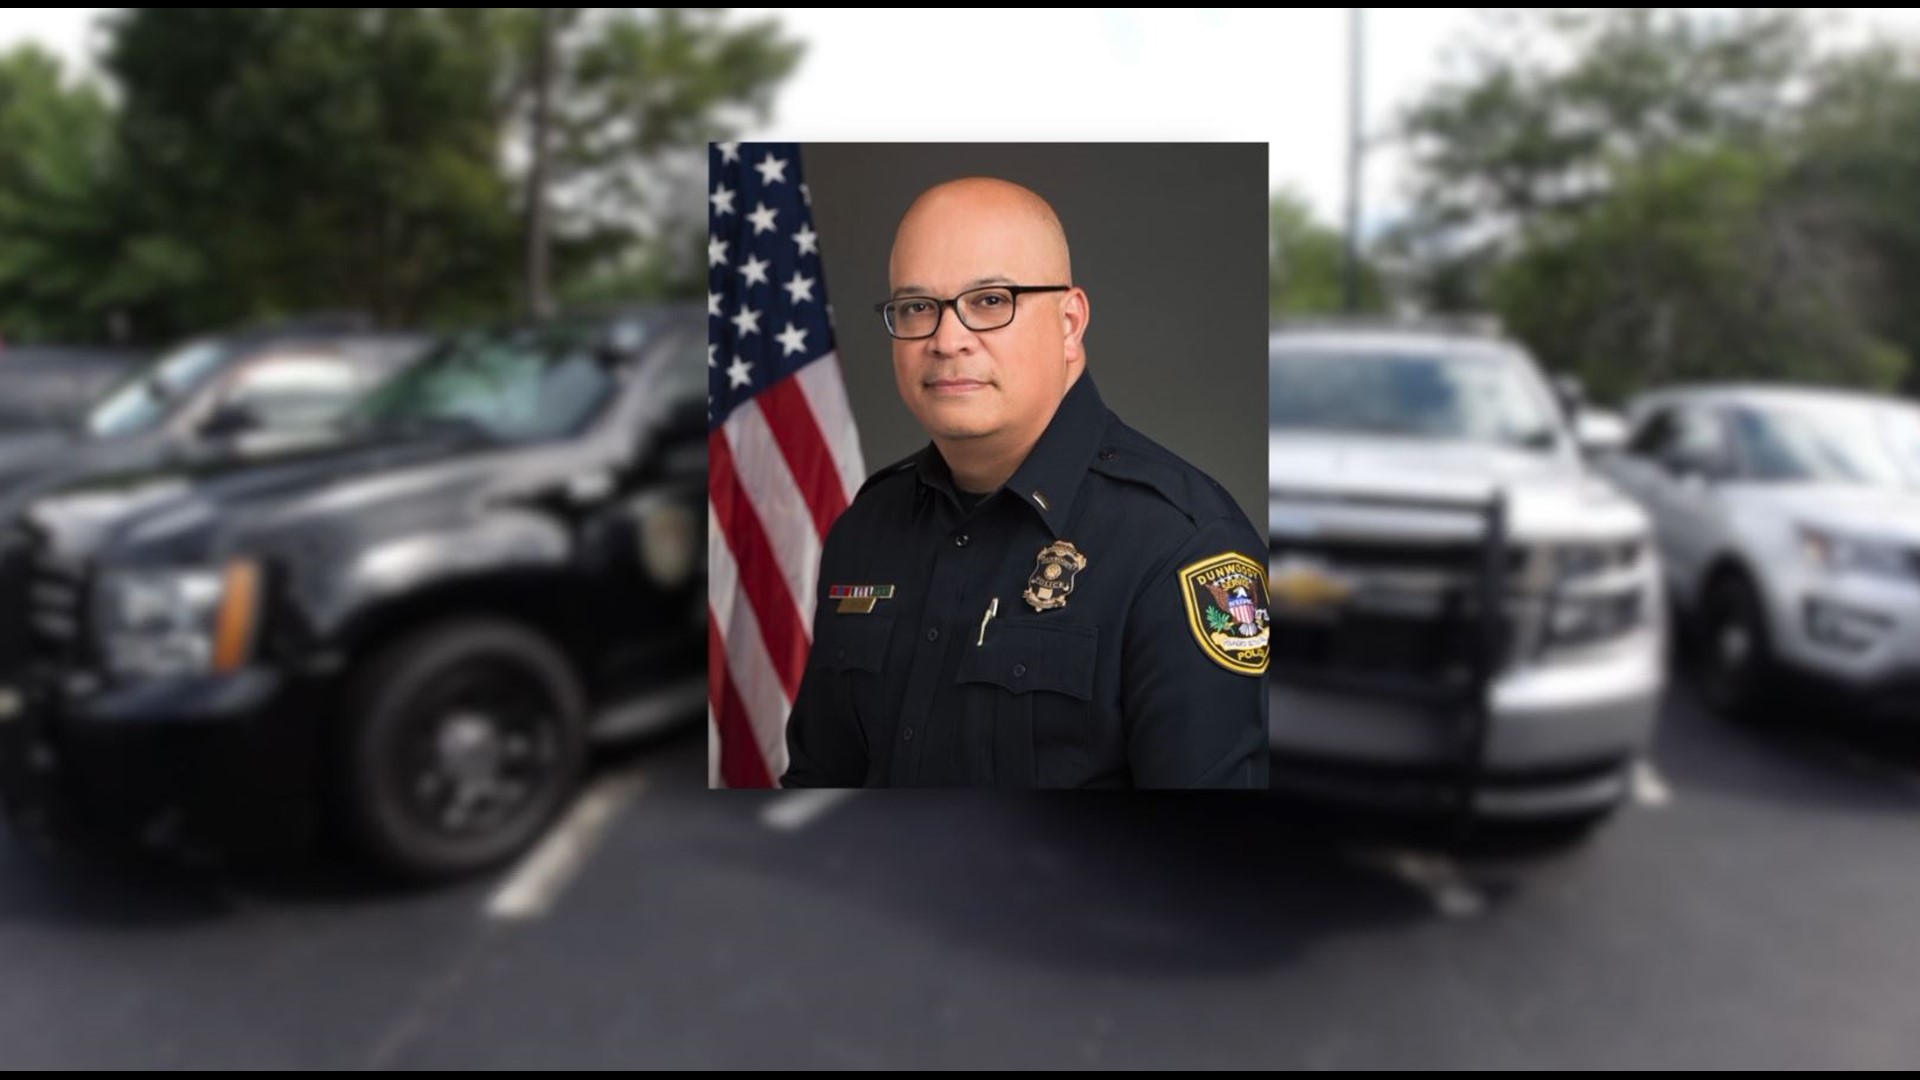 Dunwoody Police sex scandal over Lt. Espinoza's text messages | 11alive.com